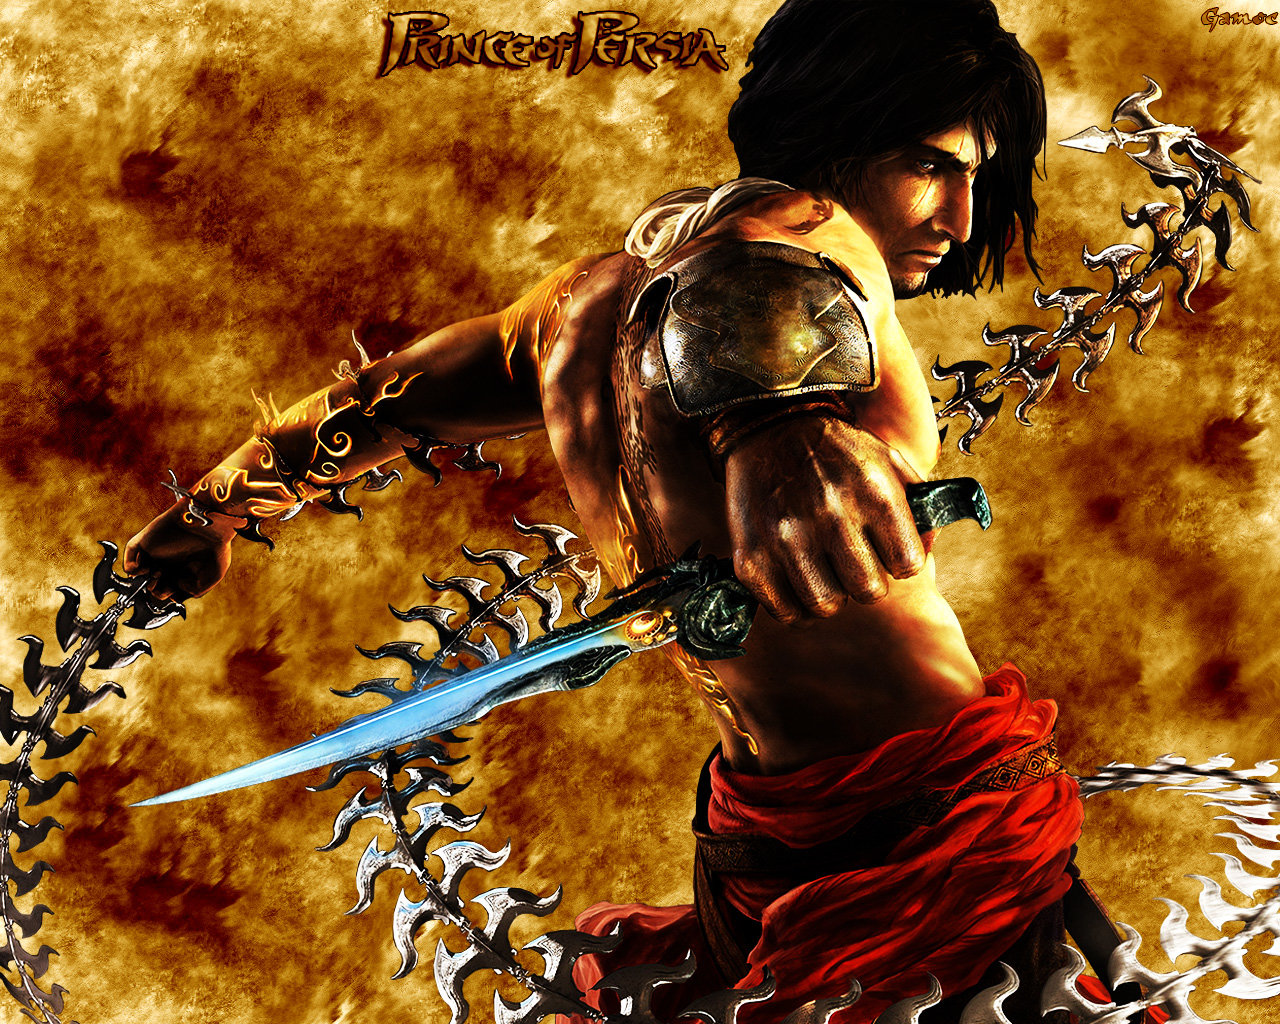 Prince Of Persia wallpapers 1280x1024 desktop backgrounds